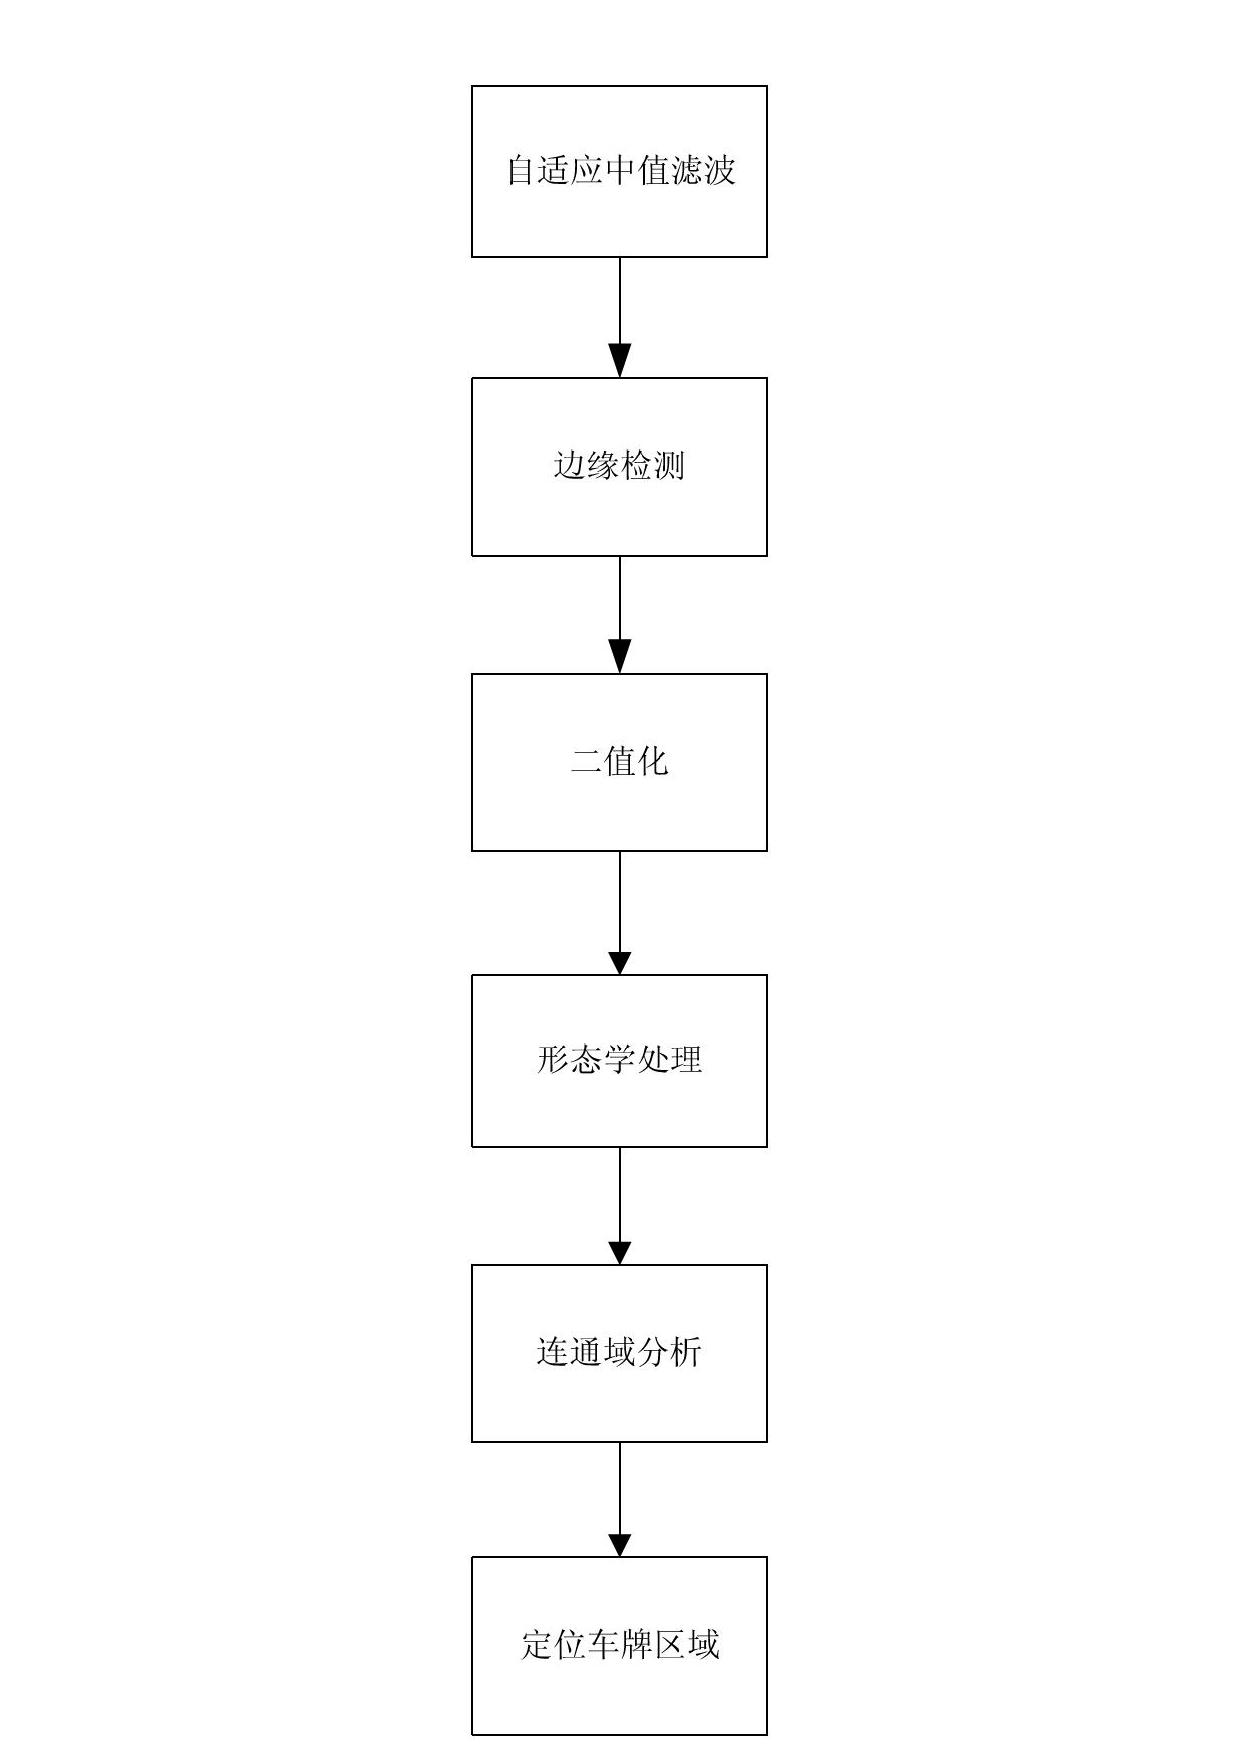 Method for precise positioning of license plate in strong light conditions